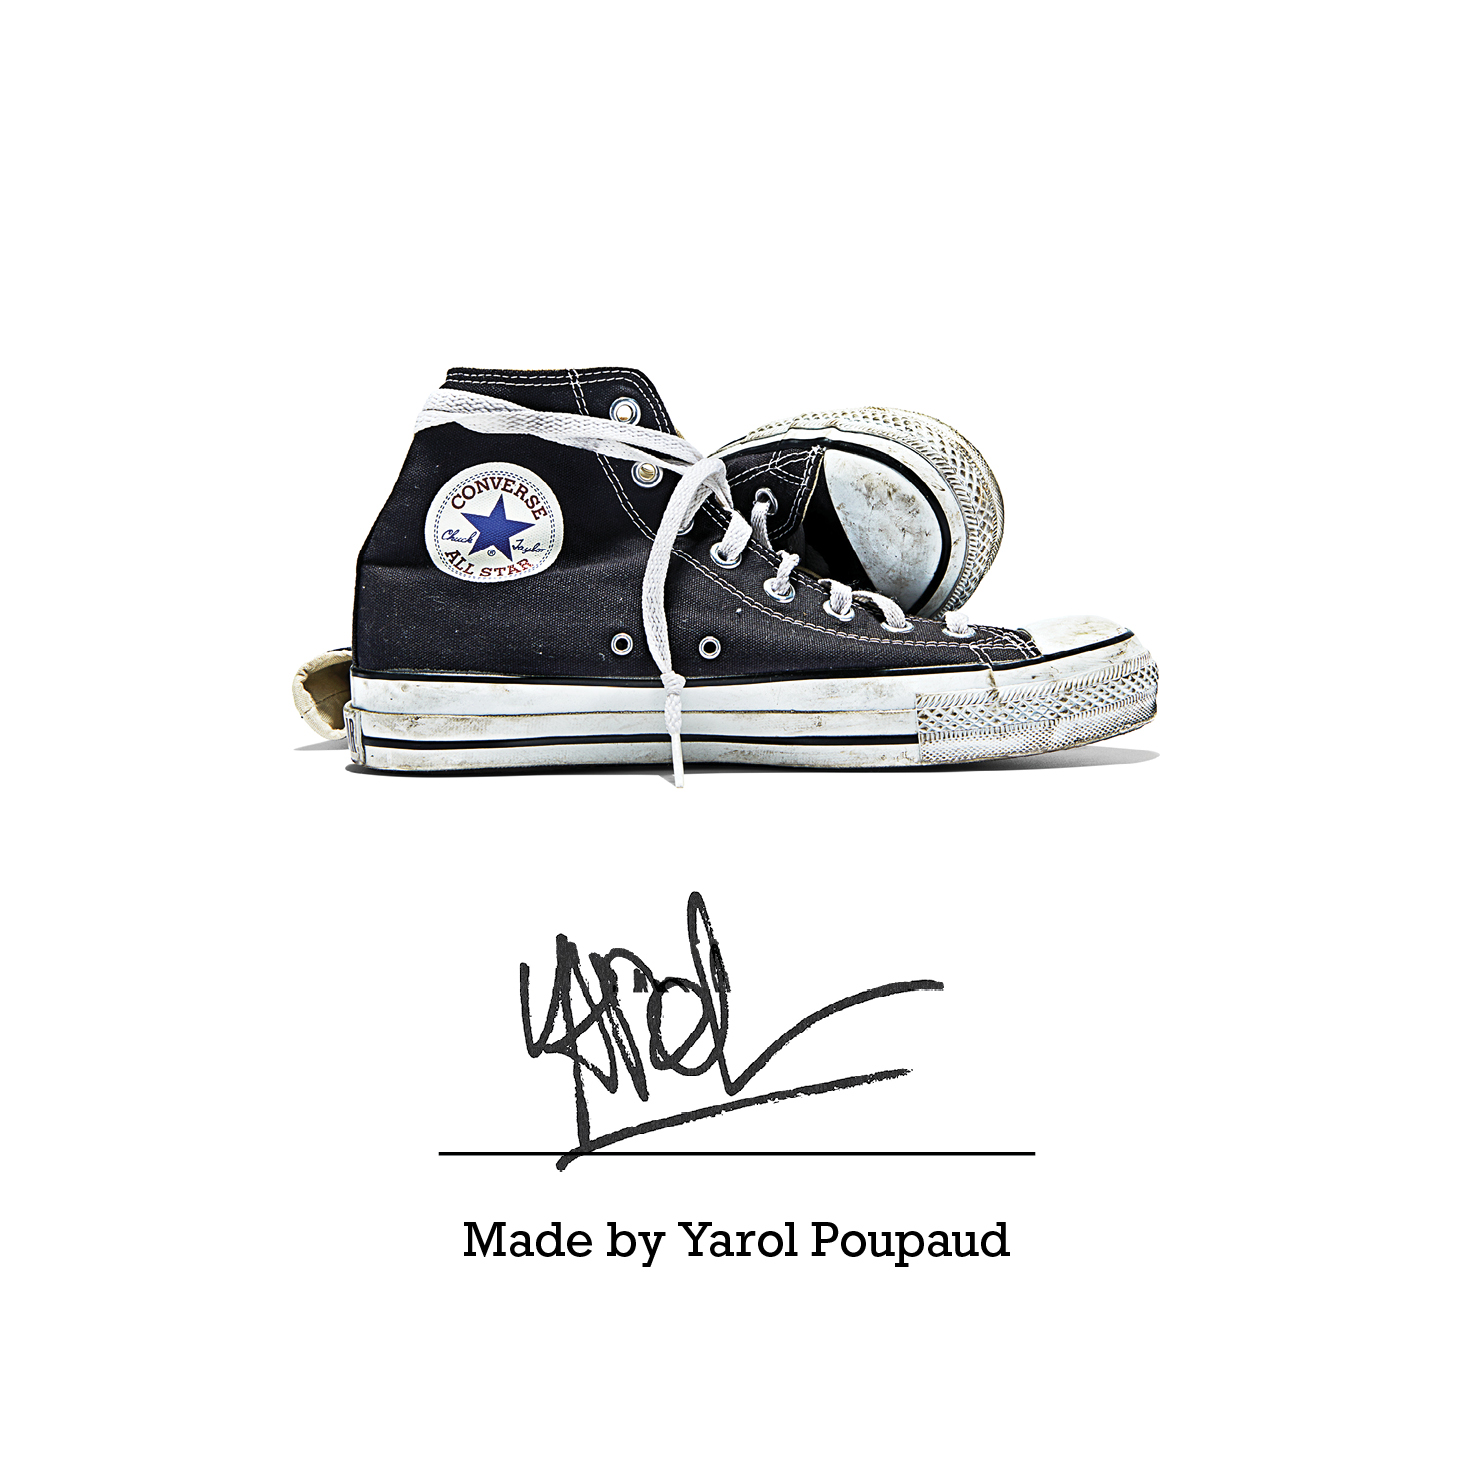 Кик чак. Converse made by you. Converse made with653365. Made by. Фраза конверс.